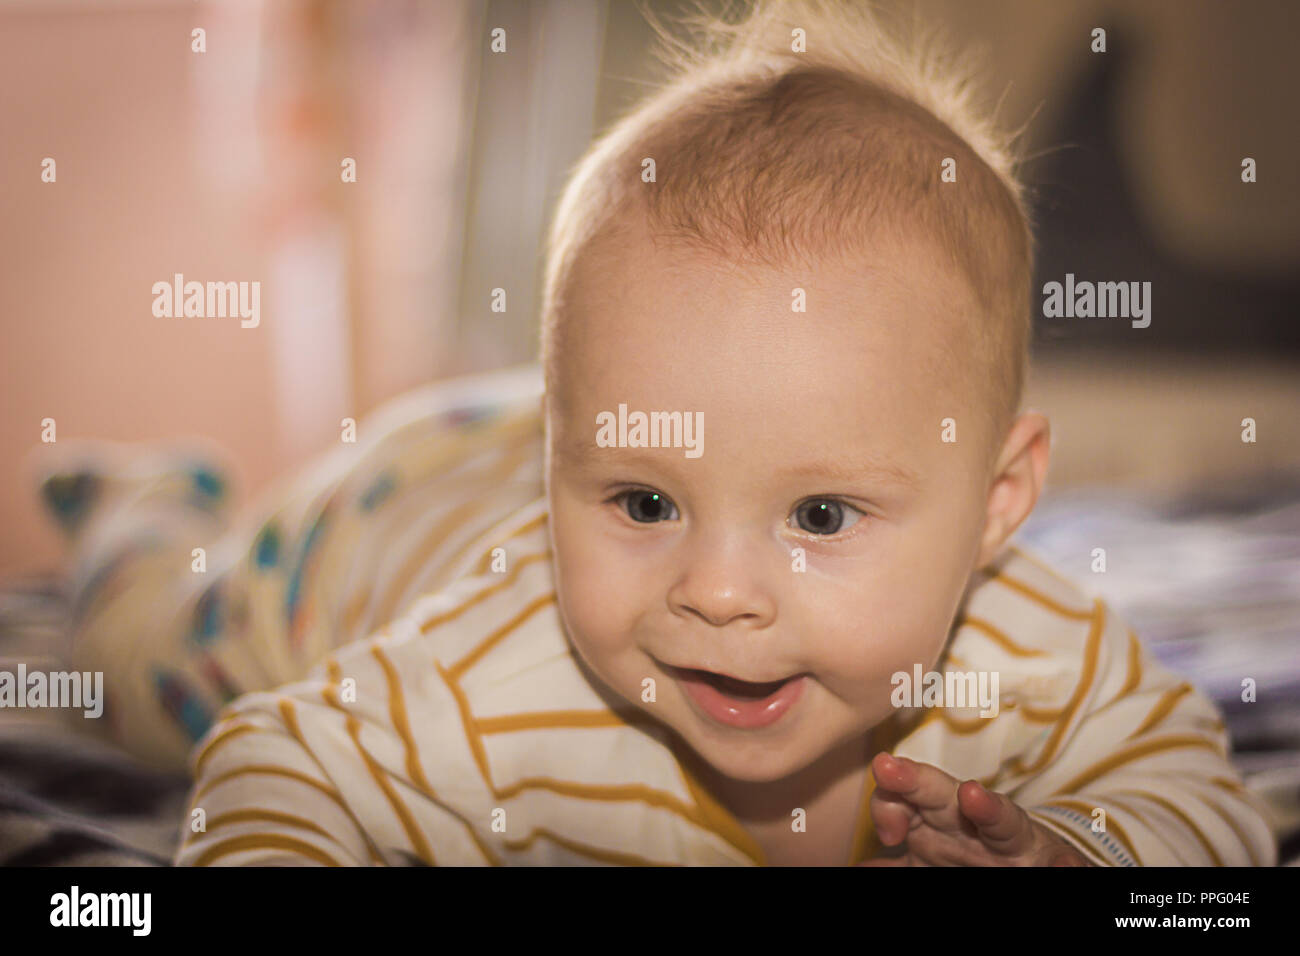 Portrait of a expressive happy baby, holds head up. baby development concept photo, lifestyle. Stock Photo